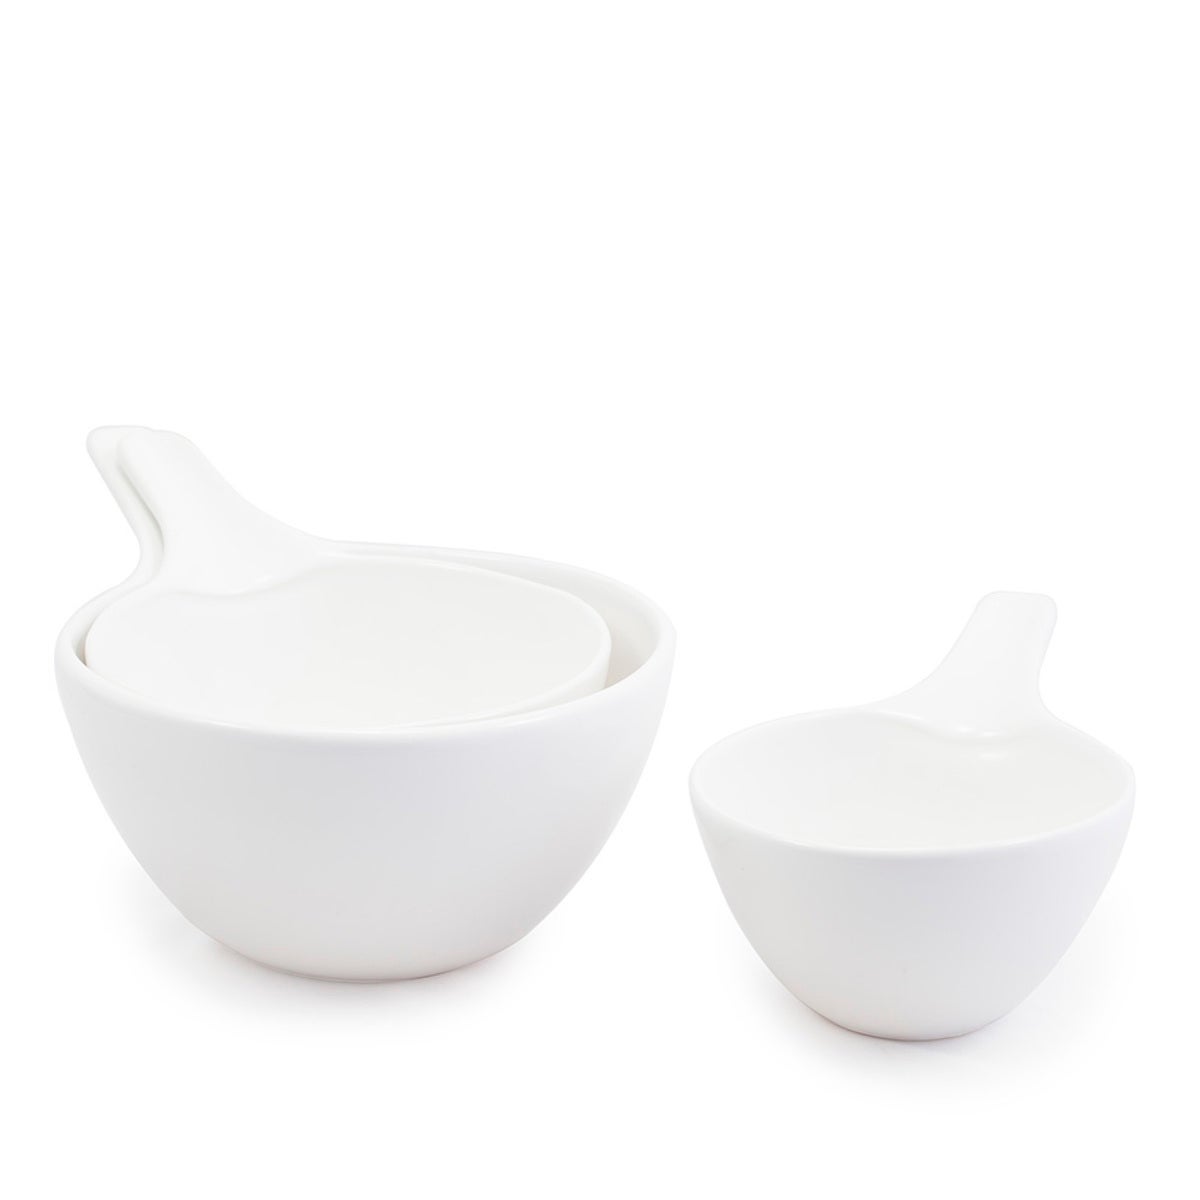 https://www.vivaterra.com/images/491568759-00_B_Earthenware-Mixing-Bowls-with-Handle-Set-of-3_main.jpg_1200Wx1200H.jpg?format=1200Wx1200H